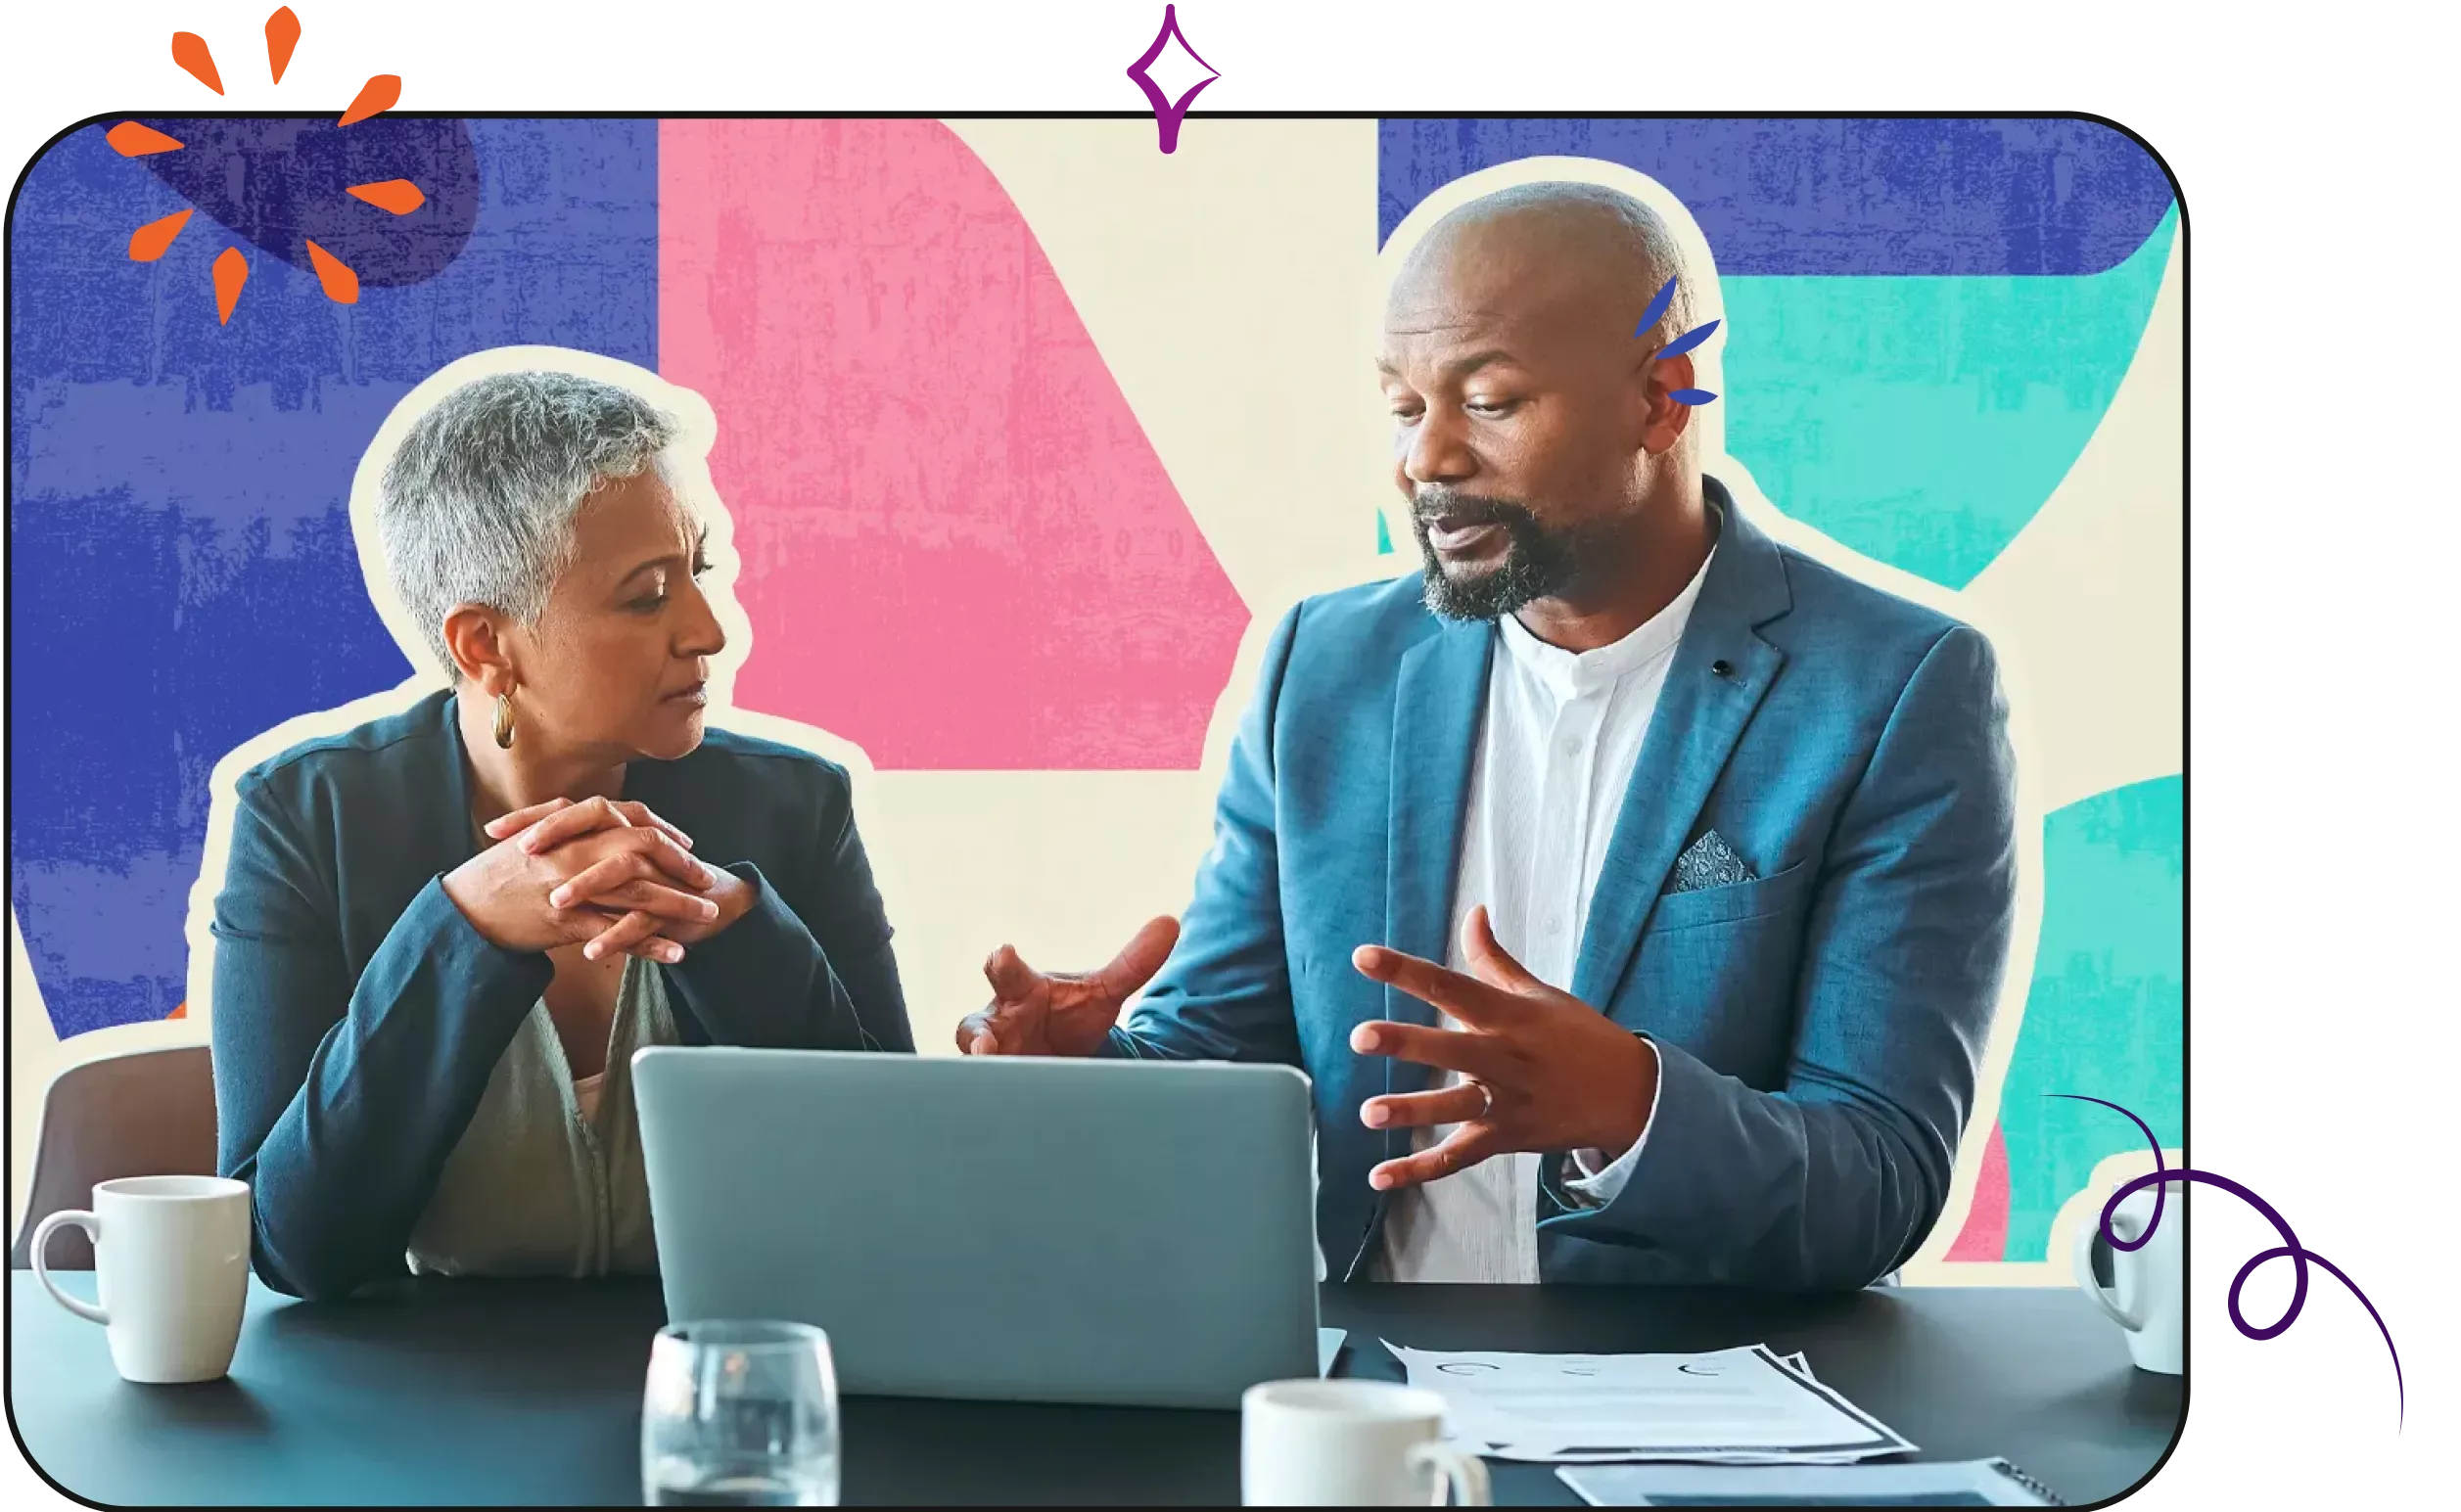 White business woman and Black colleague at table with laptop in conversation